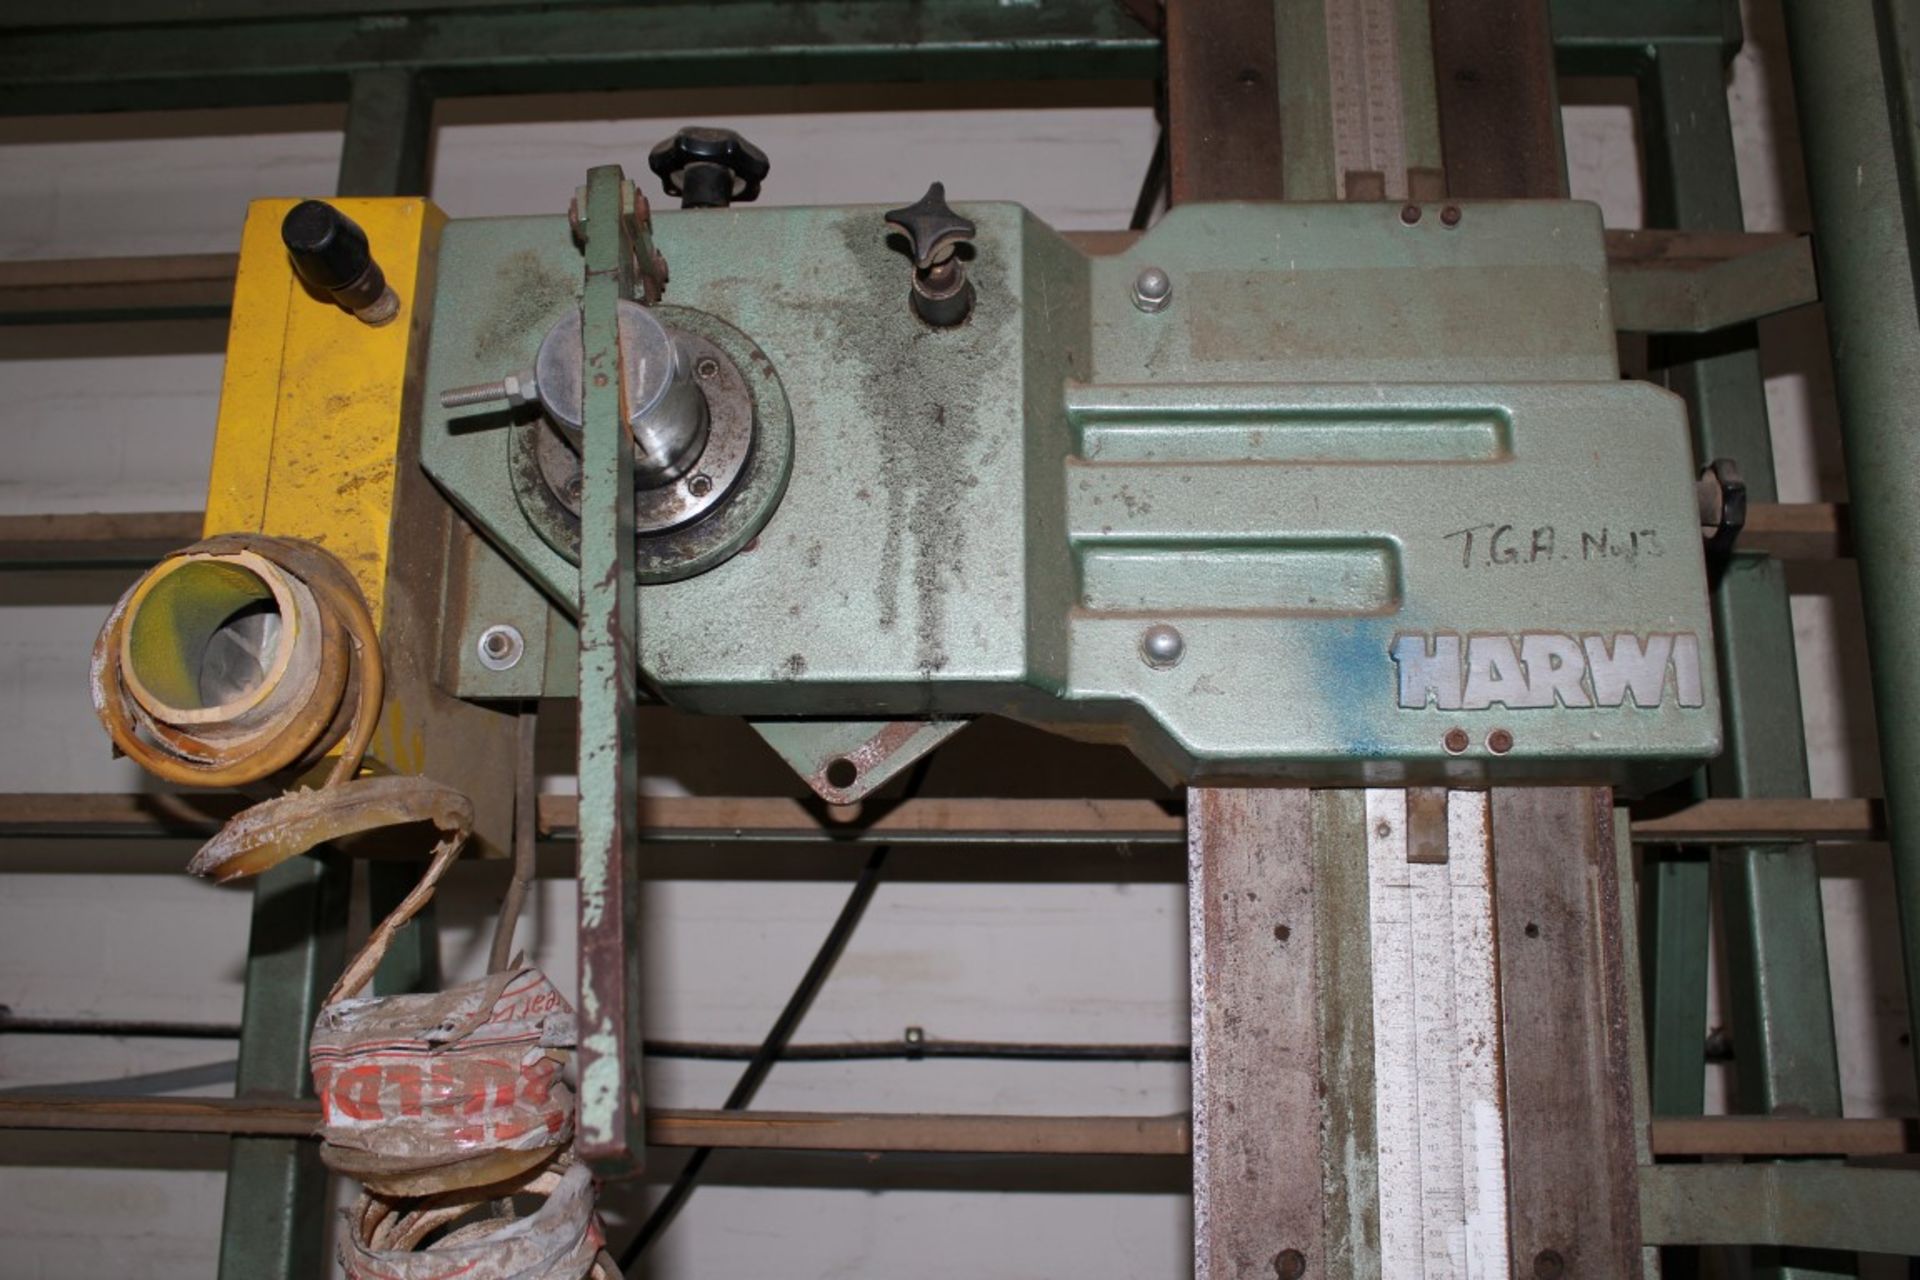 1 x Startrite Harwi 1850G Wood Cutting Vertical Wall Saw - 3 Phase - Working Order - Approx Length - Image 2 of 6